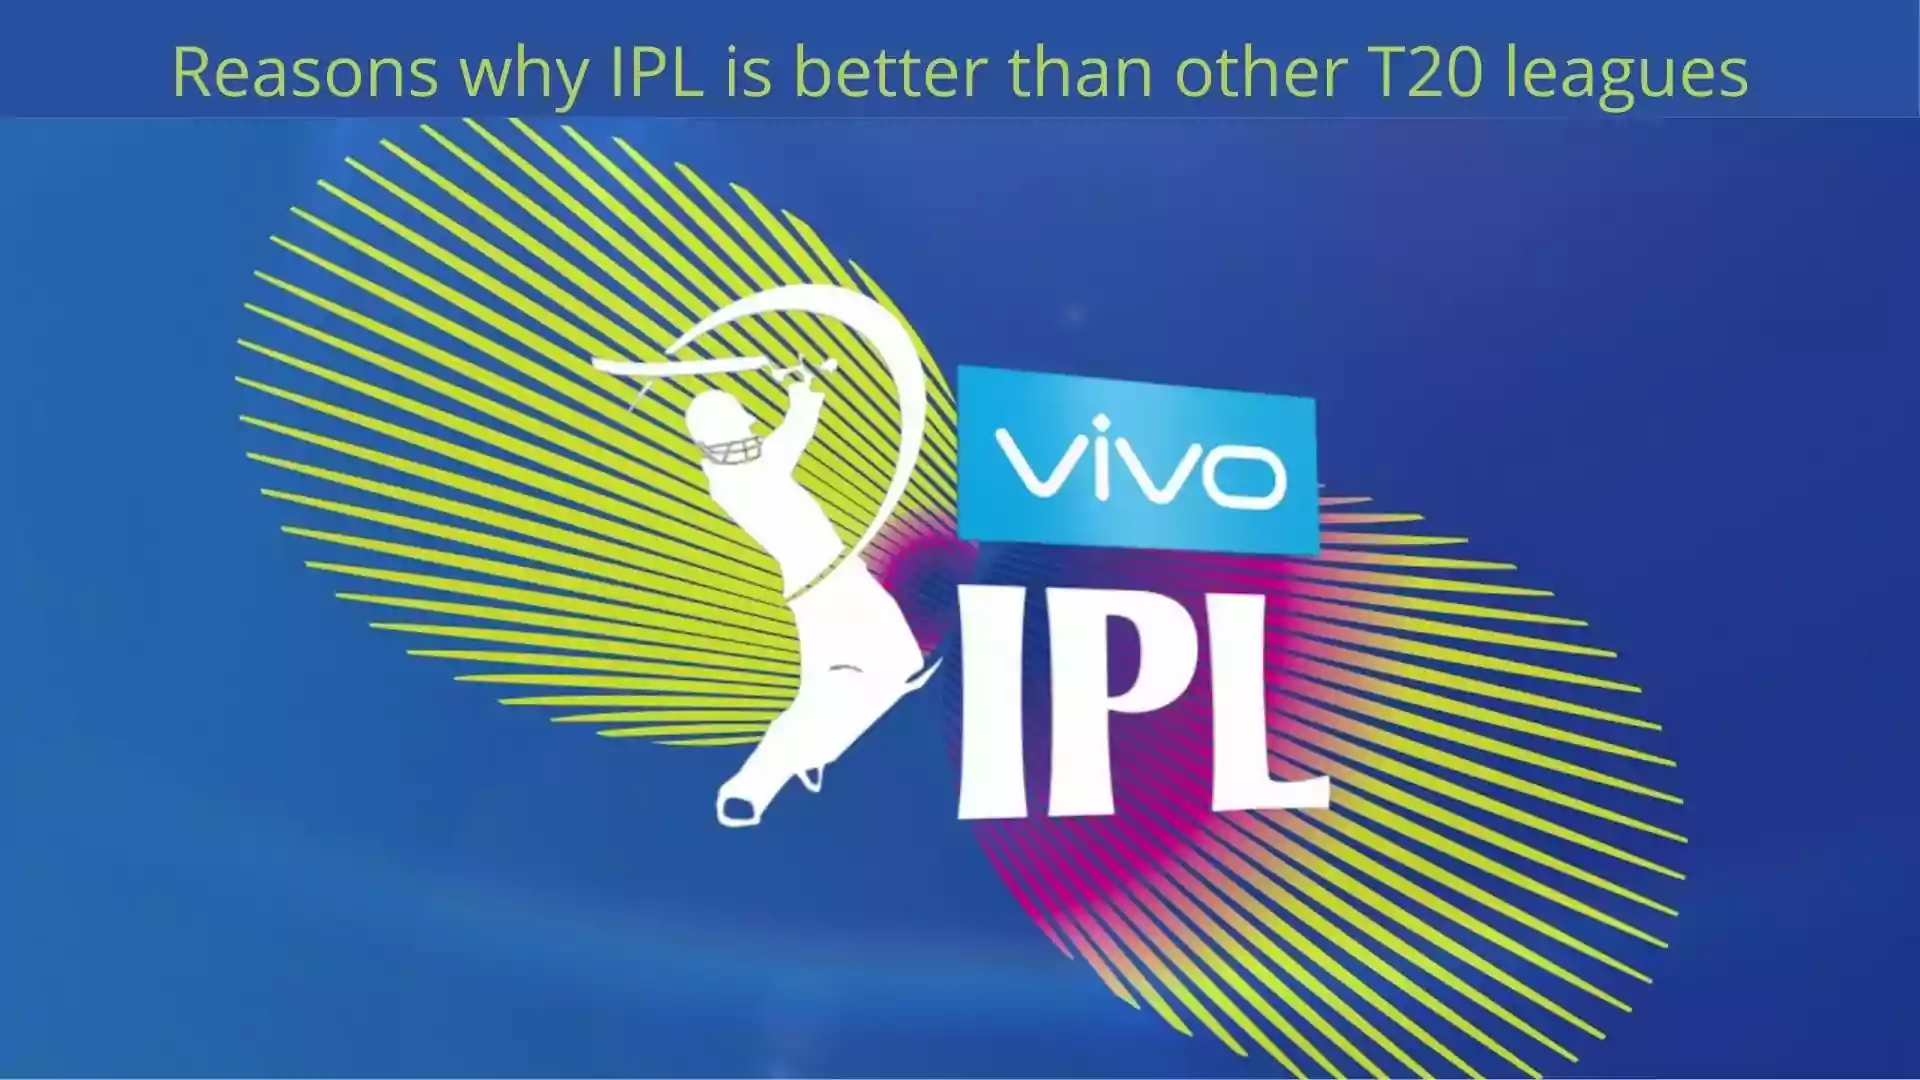 Reasons why IPL is better than other T20 leagues